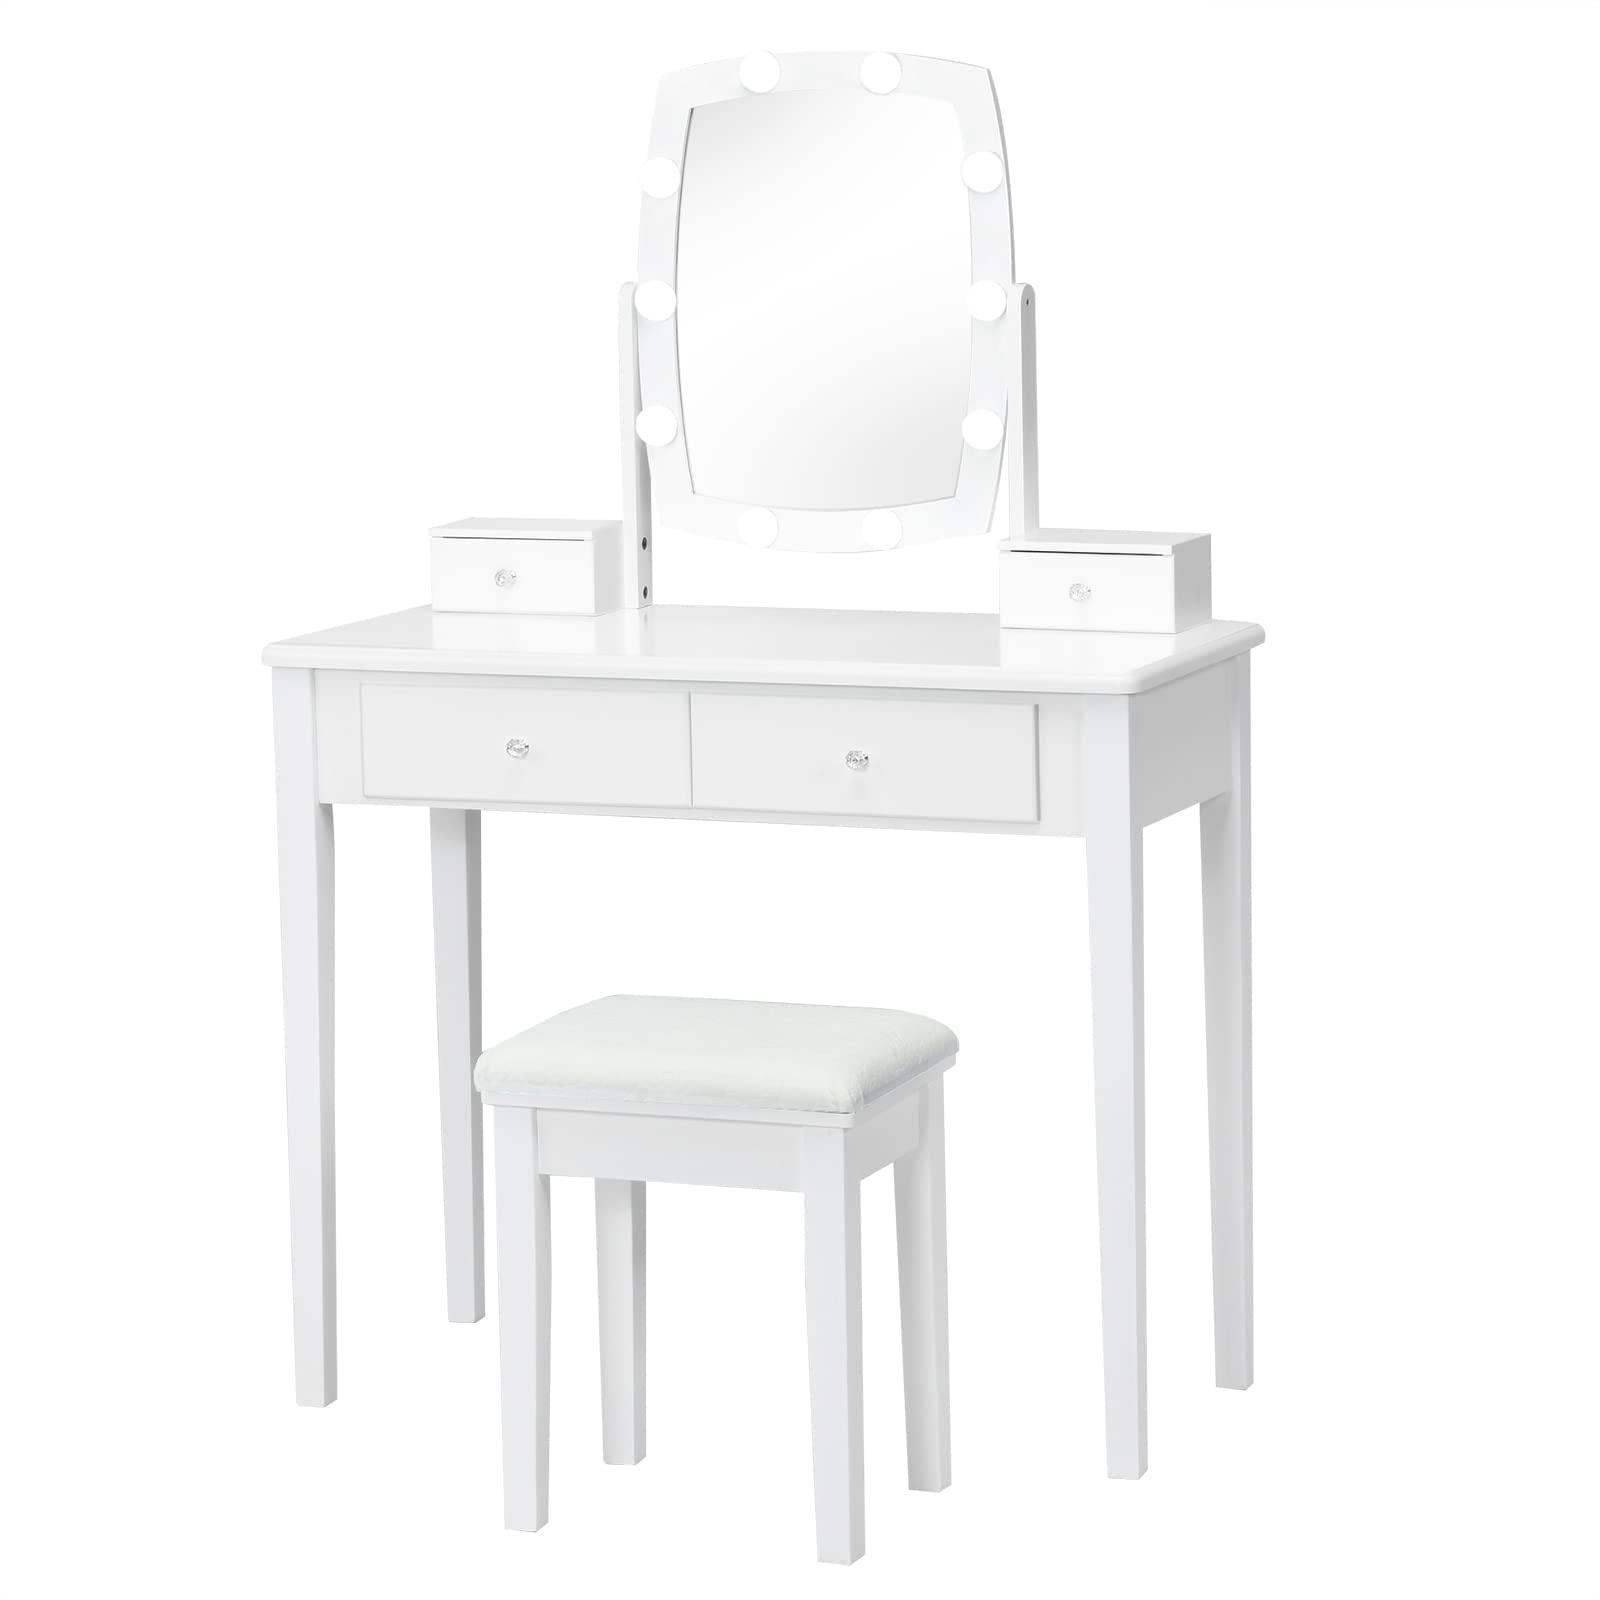 Giantex Modern Bedroom Makeup Desk Dressing Table with Cushioned Stool for Girls Women